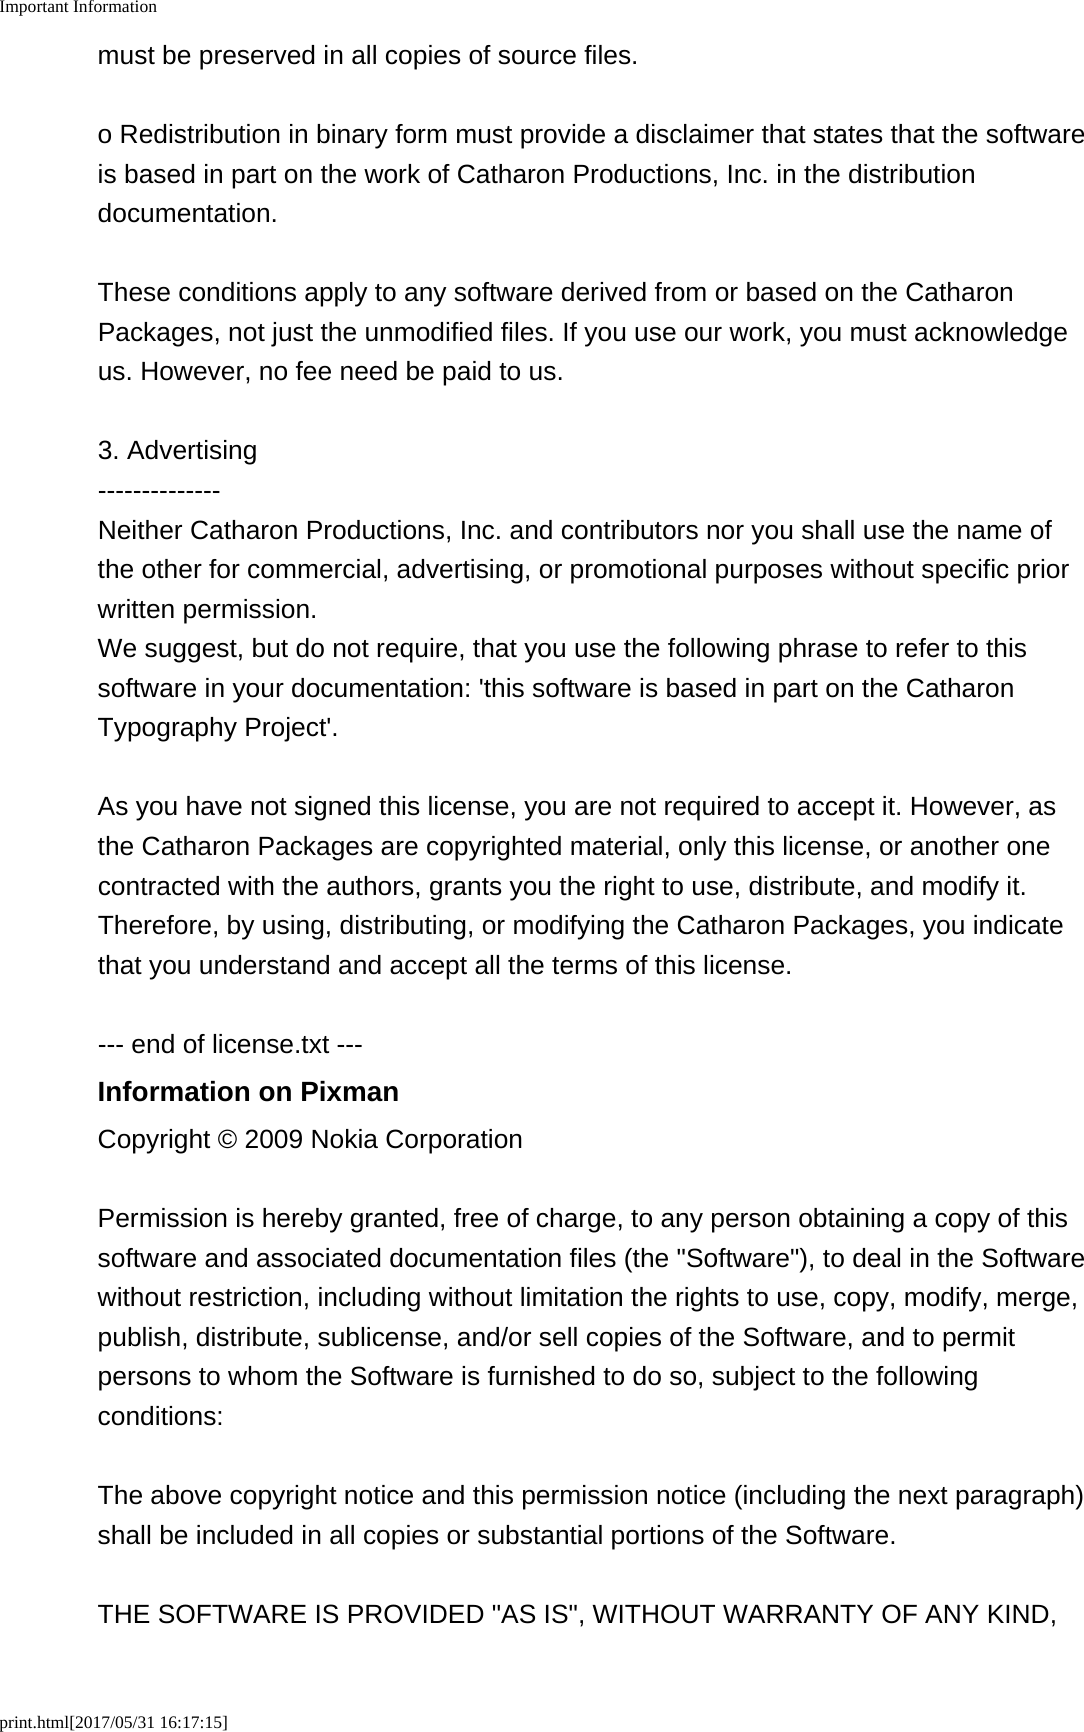 Important Informationprint.html[2017/05/31 16:17:15]must be preserved in all copies of source files.o Redistribution in binary form must provide a disclaimer that states that the softwareis based in part on the work of Catharon Productions, Inc. in the distributiondocumentation.These conditions apply to any software derived from or based on the CatharonPackages, not just the unmodified files. If you use our work, you must acknowledgeus. However, no fee need be paid to us.3. Advertising--------------Neither Catharon Productions, Inc. and contributors nor you shall use the name ofthe other for commercial, advertising, or promotional purposes without specific priorwritten permission.We suggest, but do not require, that you use the following phrase to refer to thissoftware in your documentation: &apos;this software is based in part on the CatharonTypography Project&apos;.As you have not signed this license, you are not required to accept it. However, asthe Catharon Packages are copyrighted material, only this license, or another onecontracted with the authors, grants you the right to use, distribute, and modify it.Therefore, by using, distributing, or modifying the Catharon Packages, you indicatethat you understand and accept all the terms of this license.--- end of license.txt ---Information on PixmanCopyright © 2009 Nokia CorporationPermission is hereby granted, free of charge, to any person obtaining a copy of thissoftware and associated documentation files (the &quot;Software&quot;), to deal in the Softwarewithout restriction, including without limitation the rights to use, copy, modify, merge,publish, distribute, sublicense, and/or sell copies of the Software, and to permitpersons to whom the Software is furnished to do so, subject to the followingconditions:The above copyright notice and this permission notice (including the next paragraph)shall be included in all copies or substantial portions of the Software.THE SOFTWARE IS PROVIDED &quot;AS IS&quot;, WITHOUT WARRANTY OF ANY KIND,